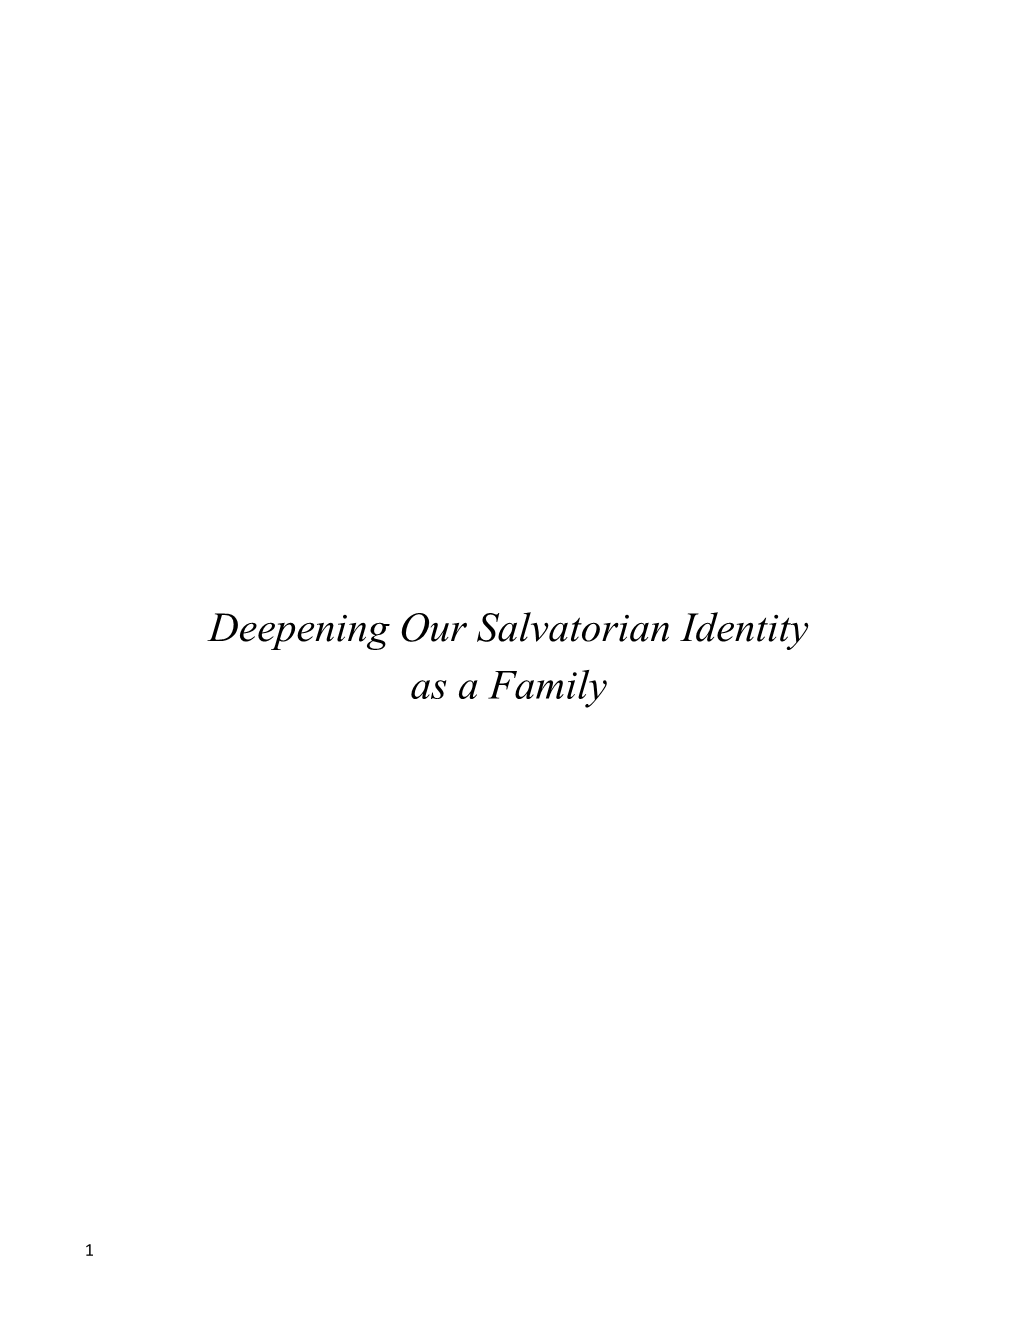 Deepening Our Salvatorian Identity As a Family